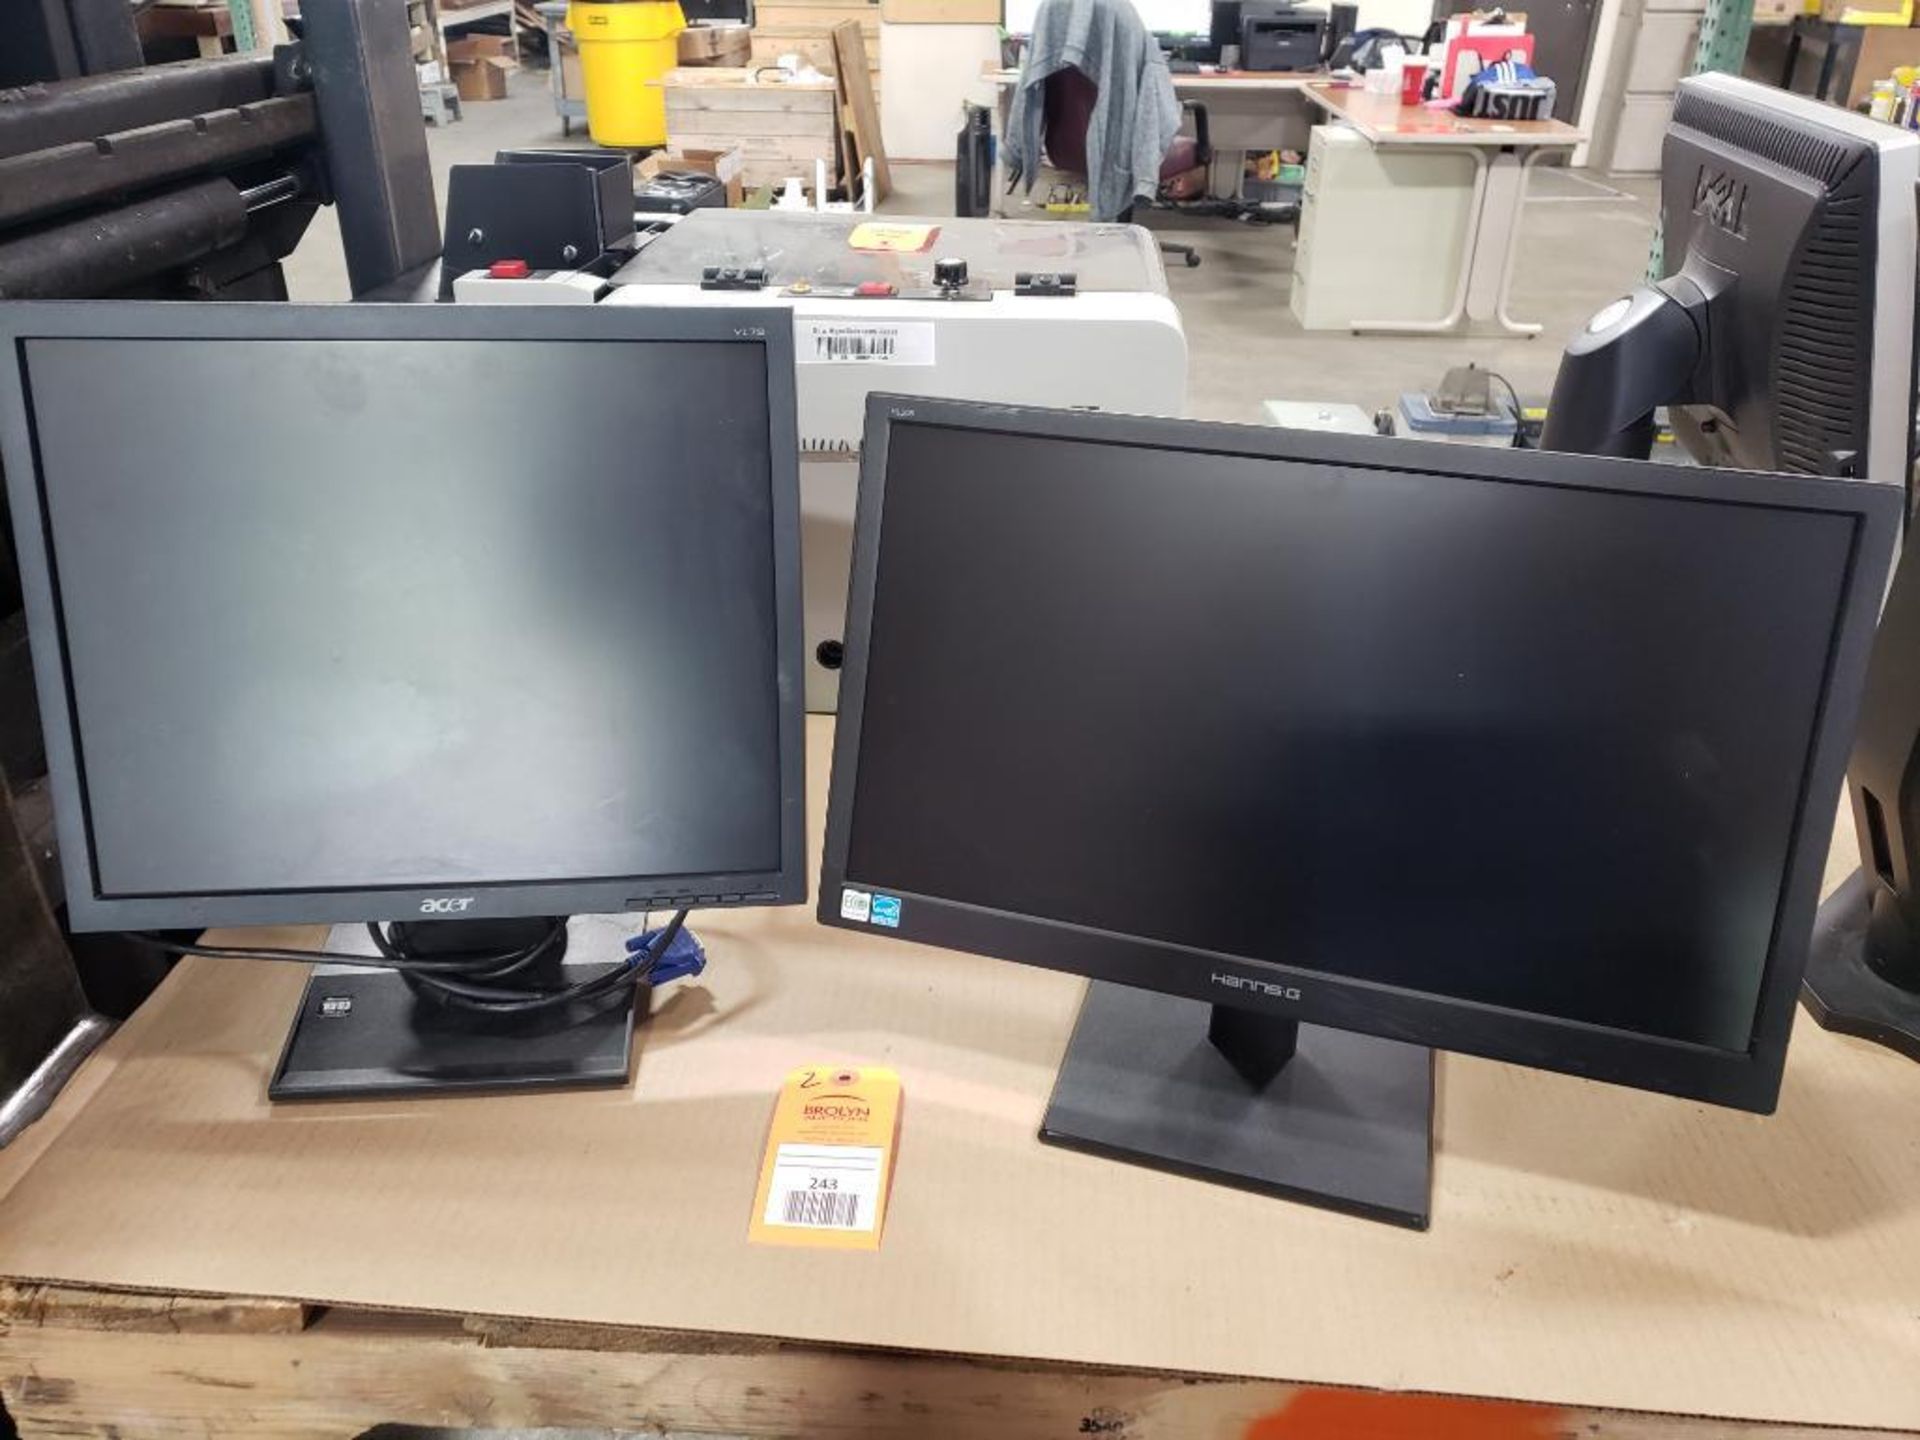 Qty 2 - Assorted PC monitors. ACER, HANNS-G.